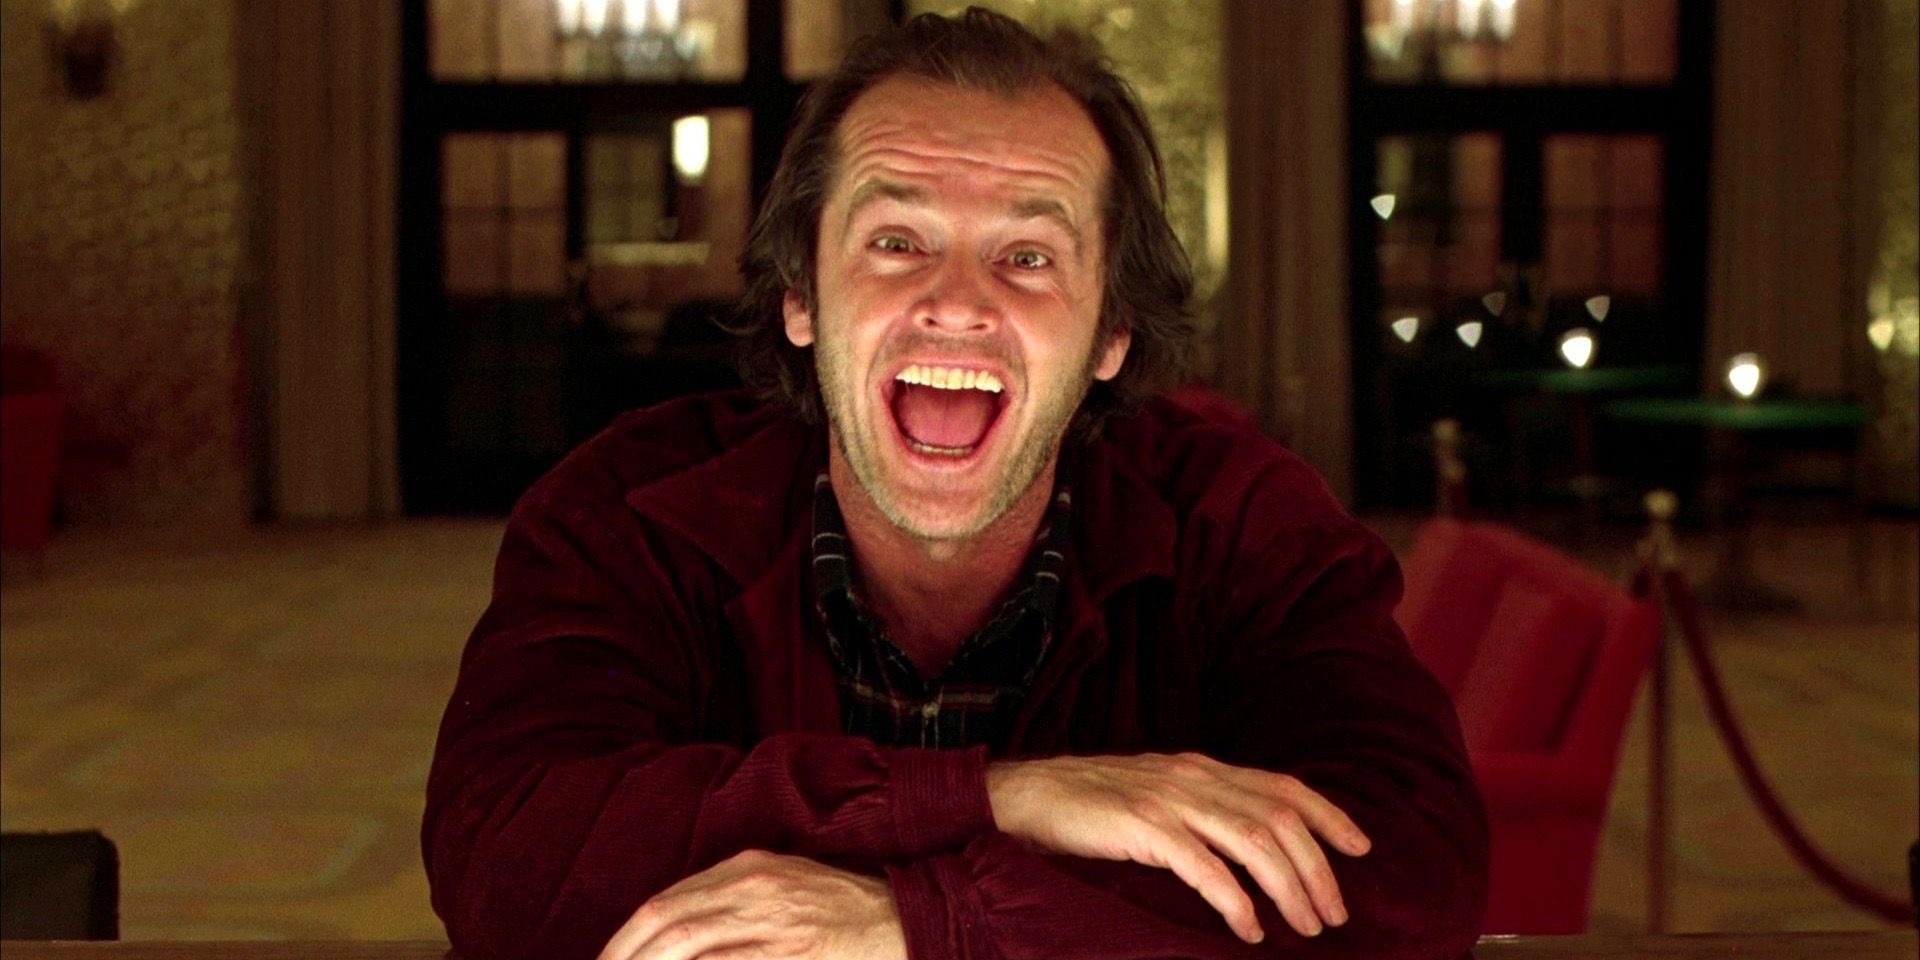 Jack laughing in The Shining at the bar